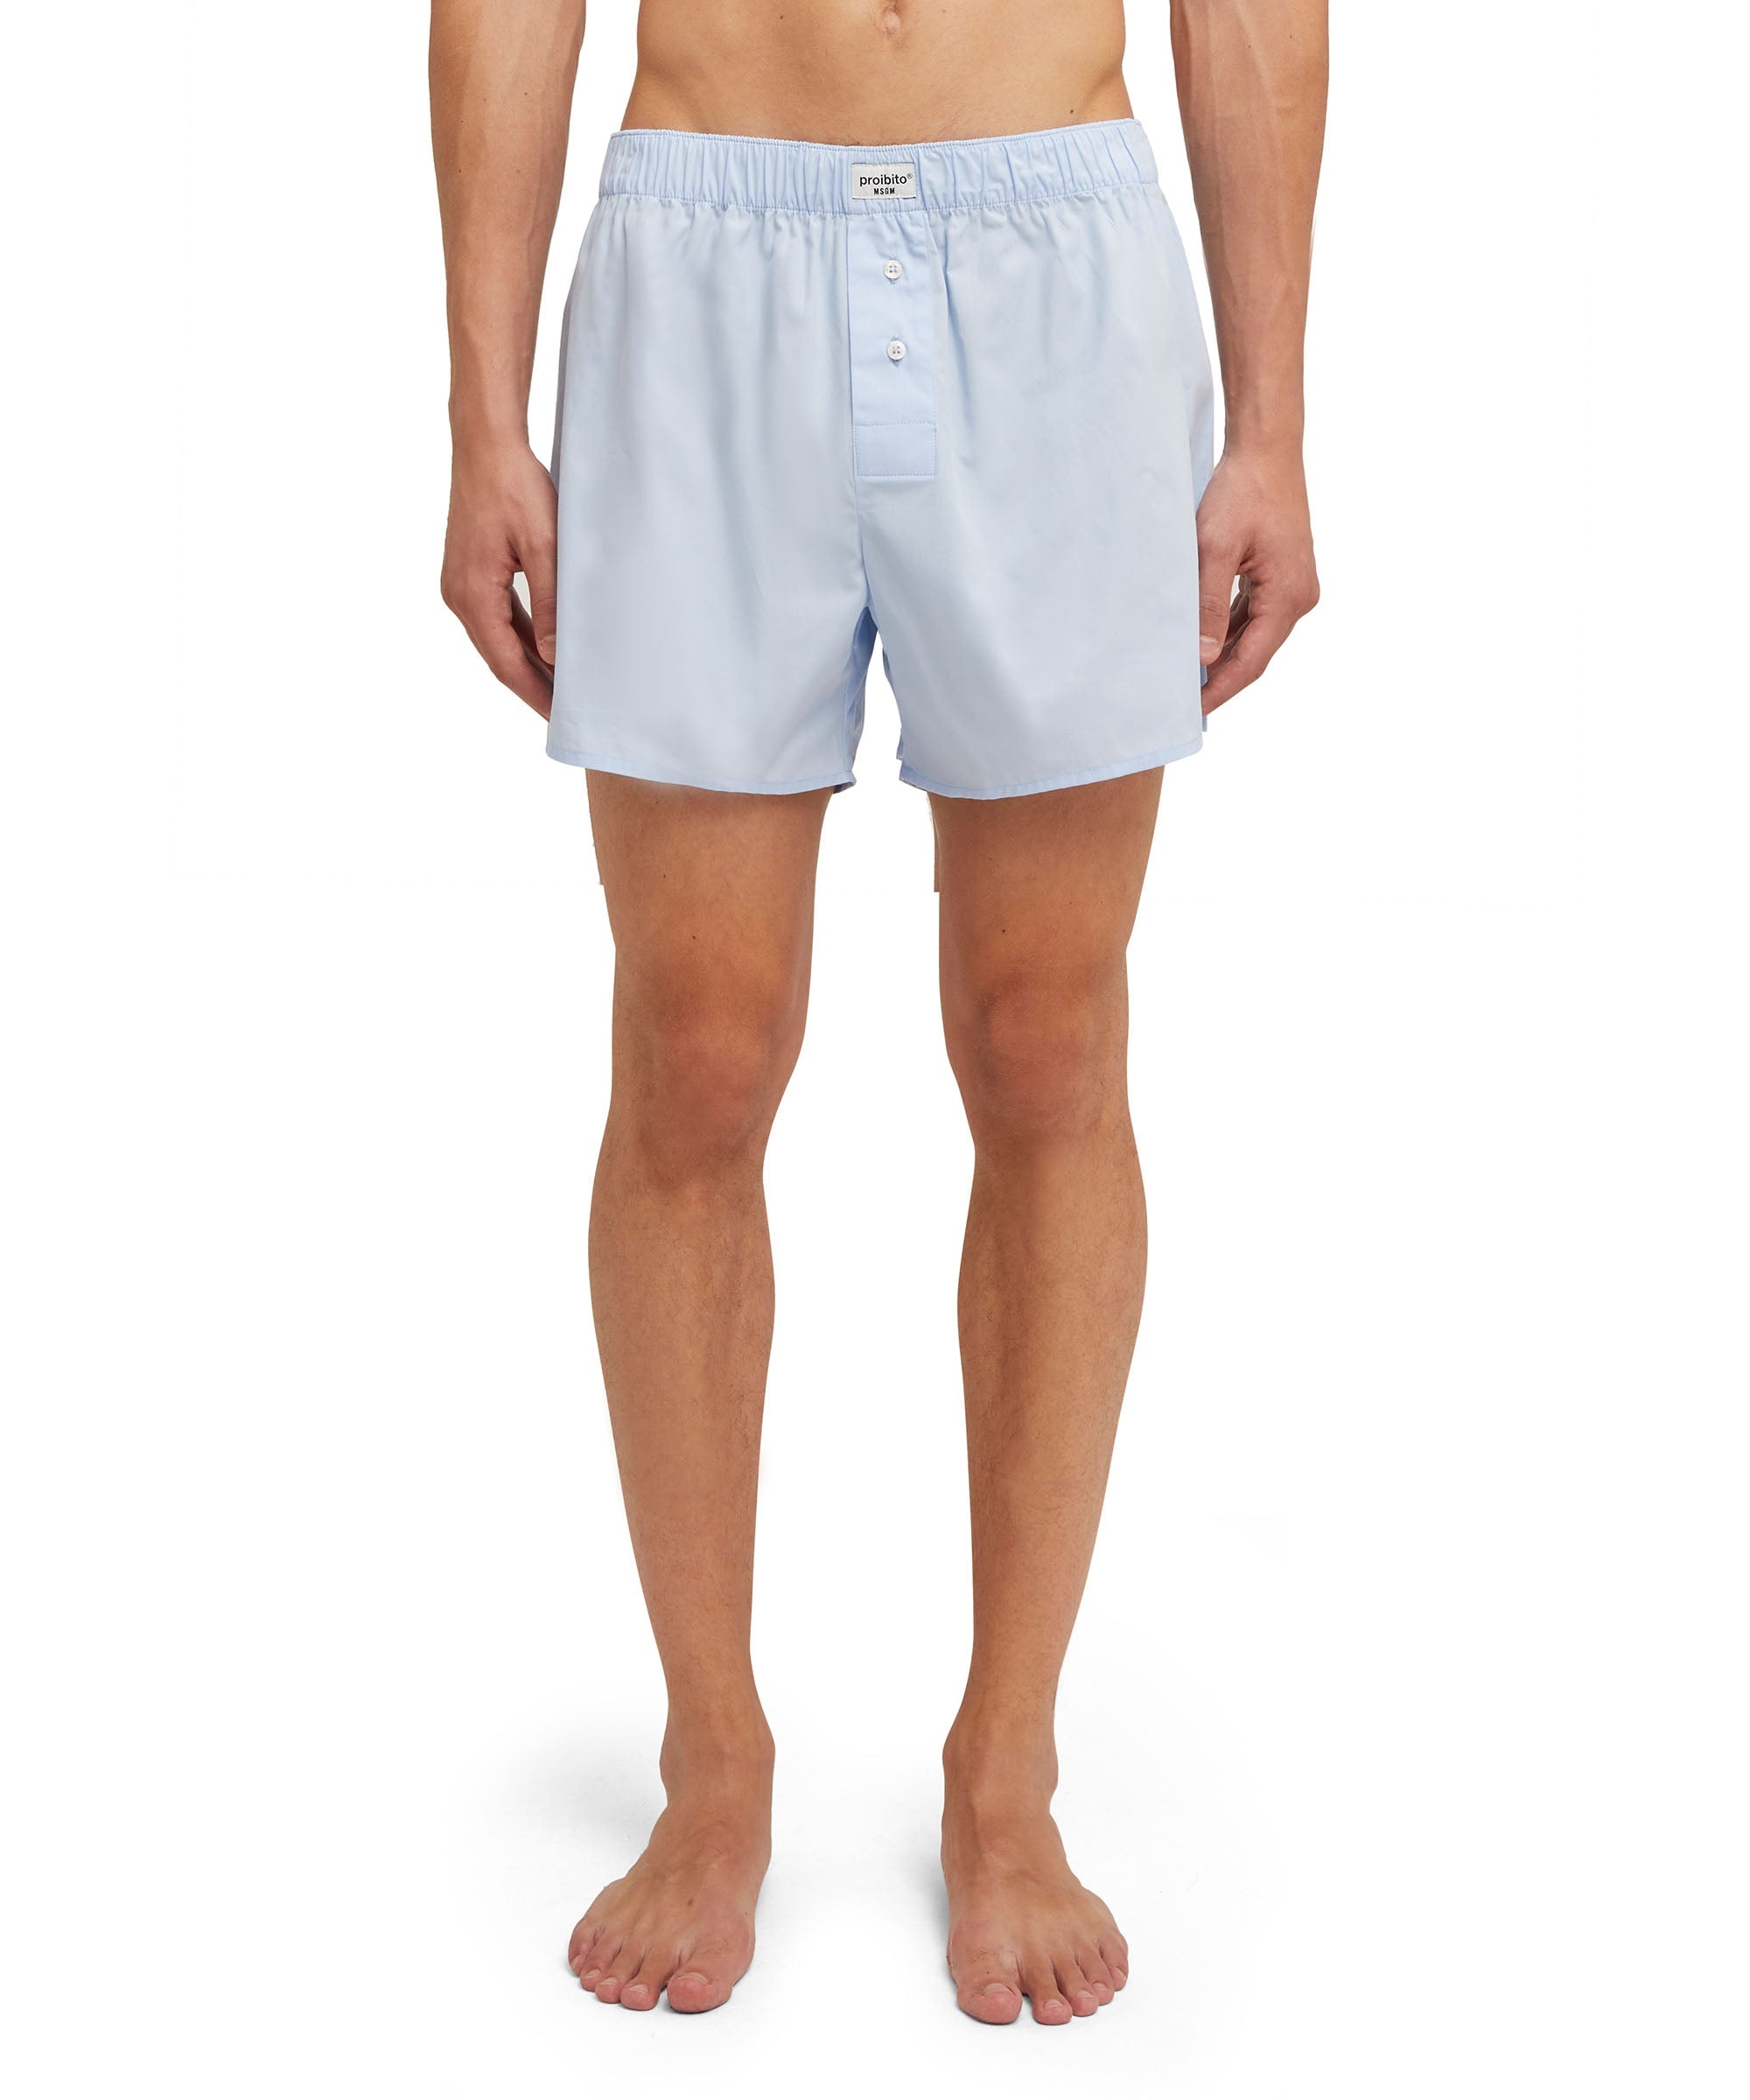 Cotton boxer with a classic line - 2